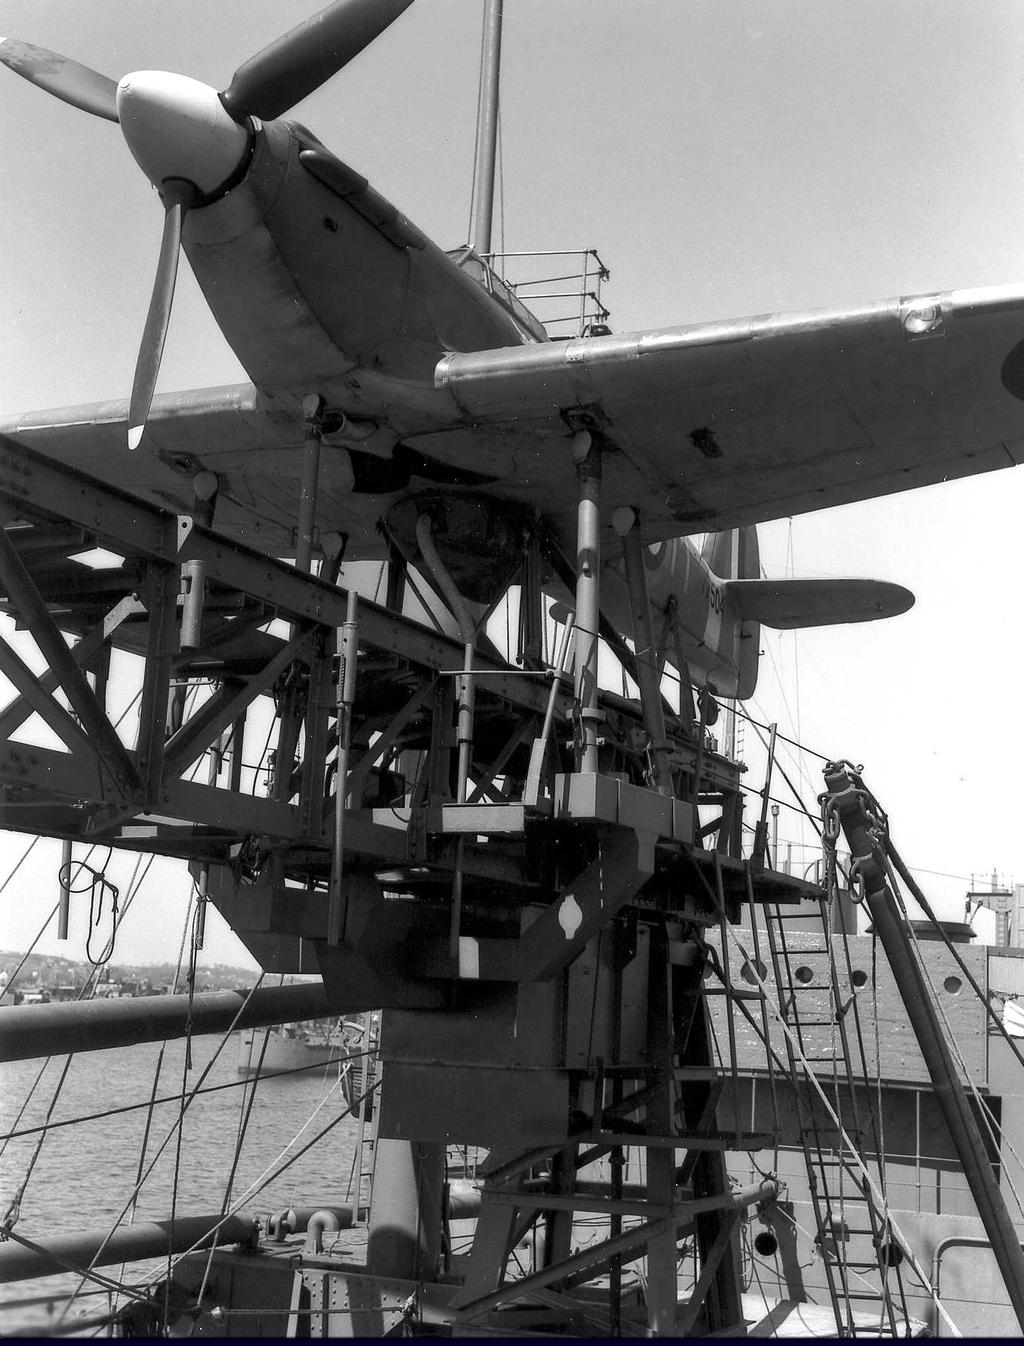 Catapults & Aircraft: The catapults were complex devices perched precariously high on a ship s bow, as this image indicates.